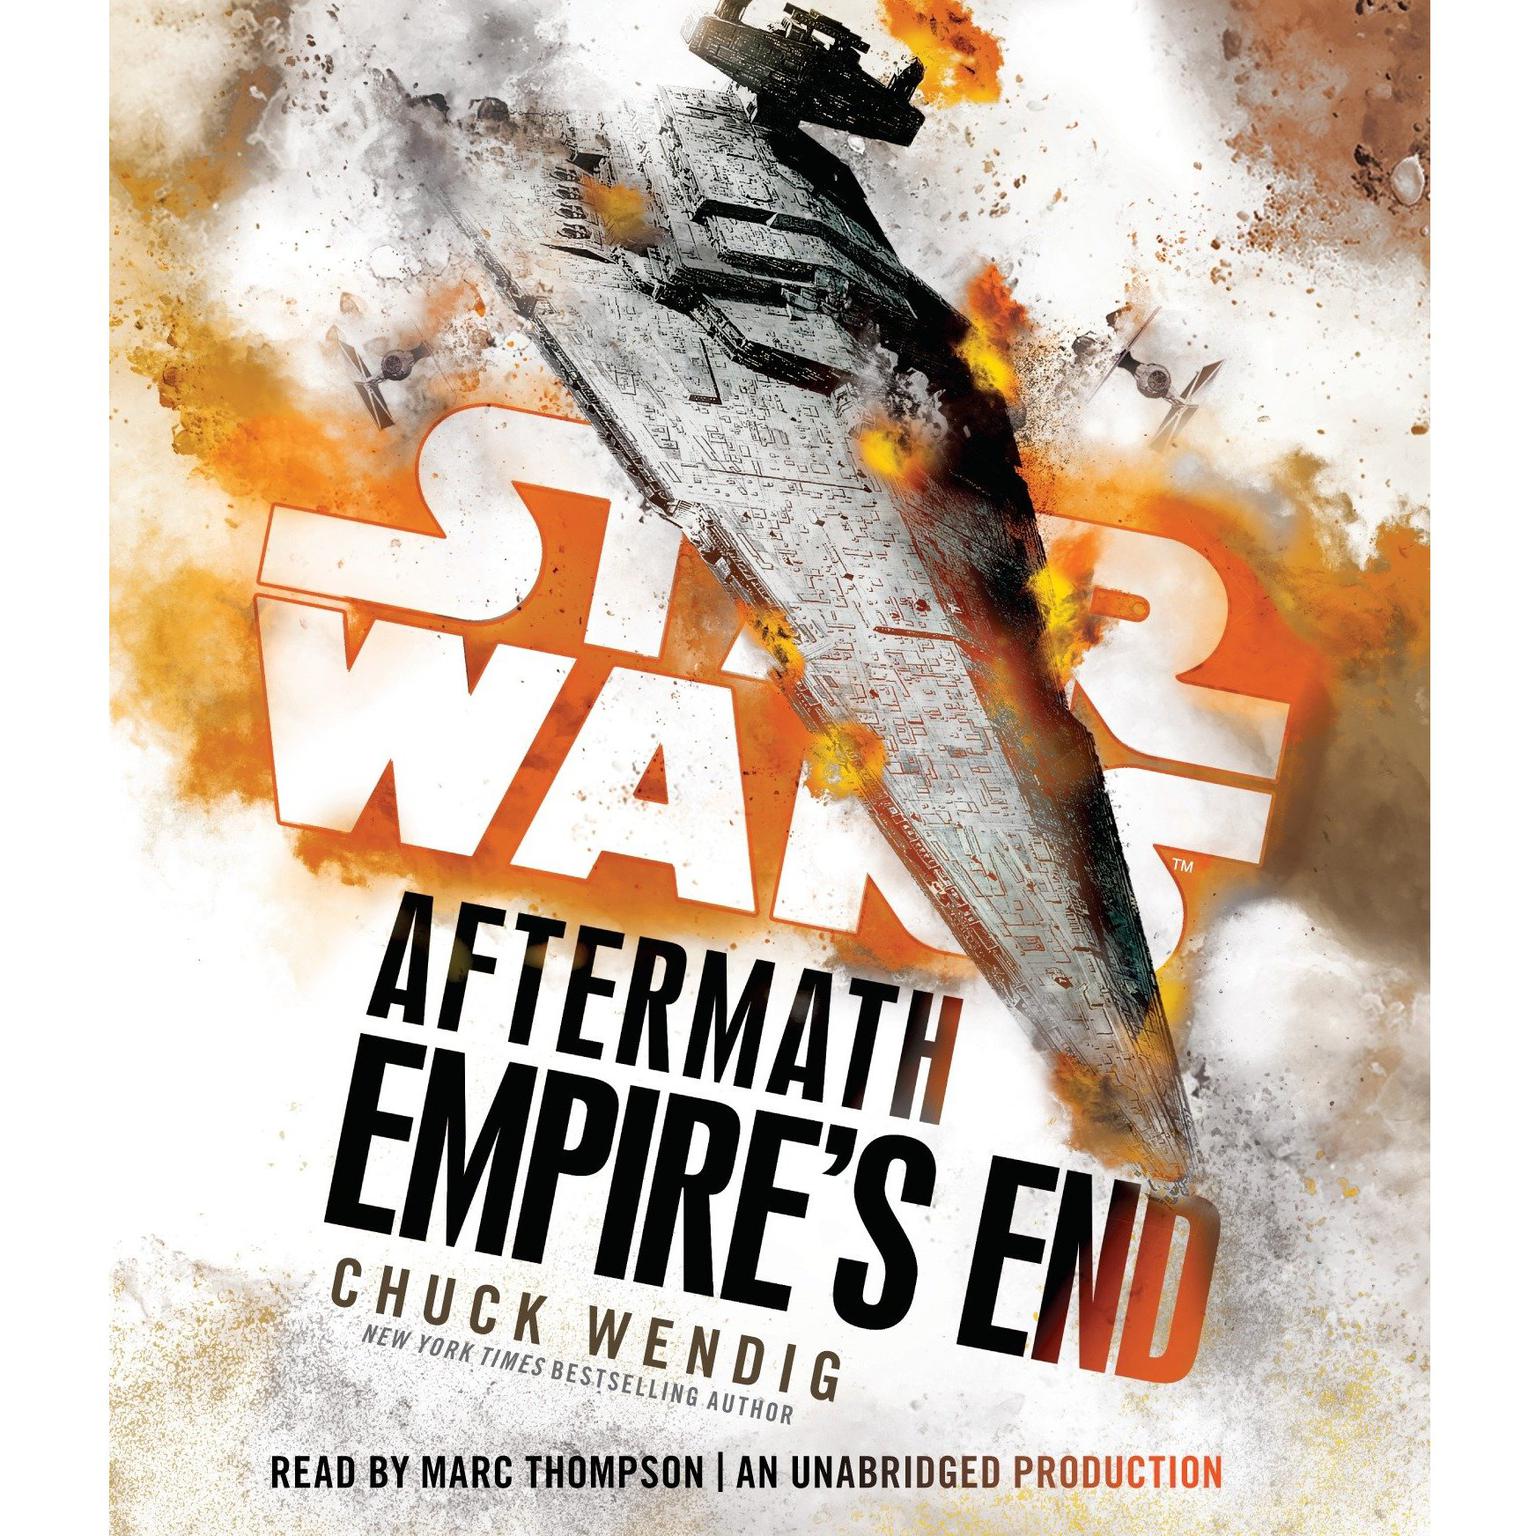 Empire’s End: Aftermath Audiobook, by Chuck Wendig